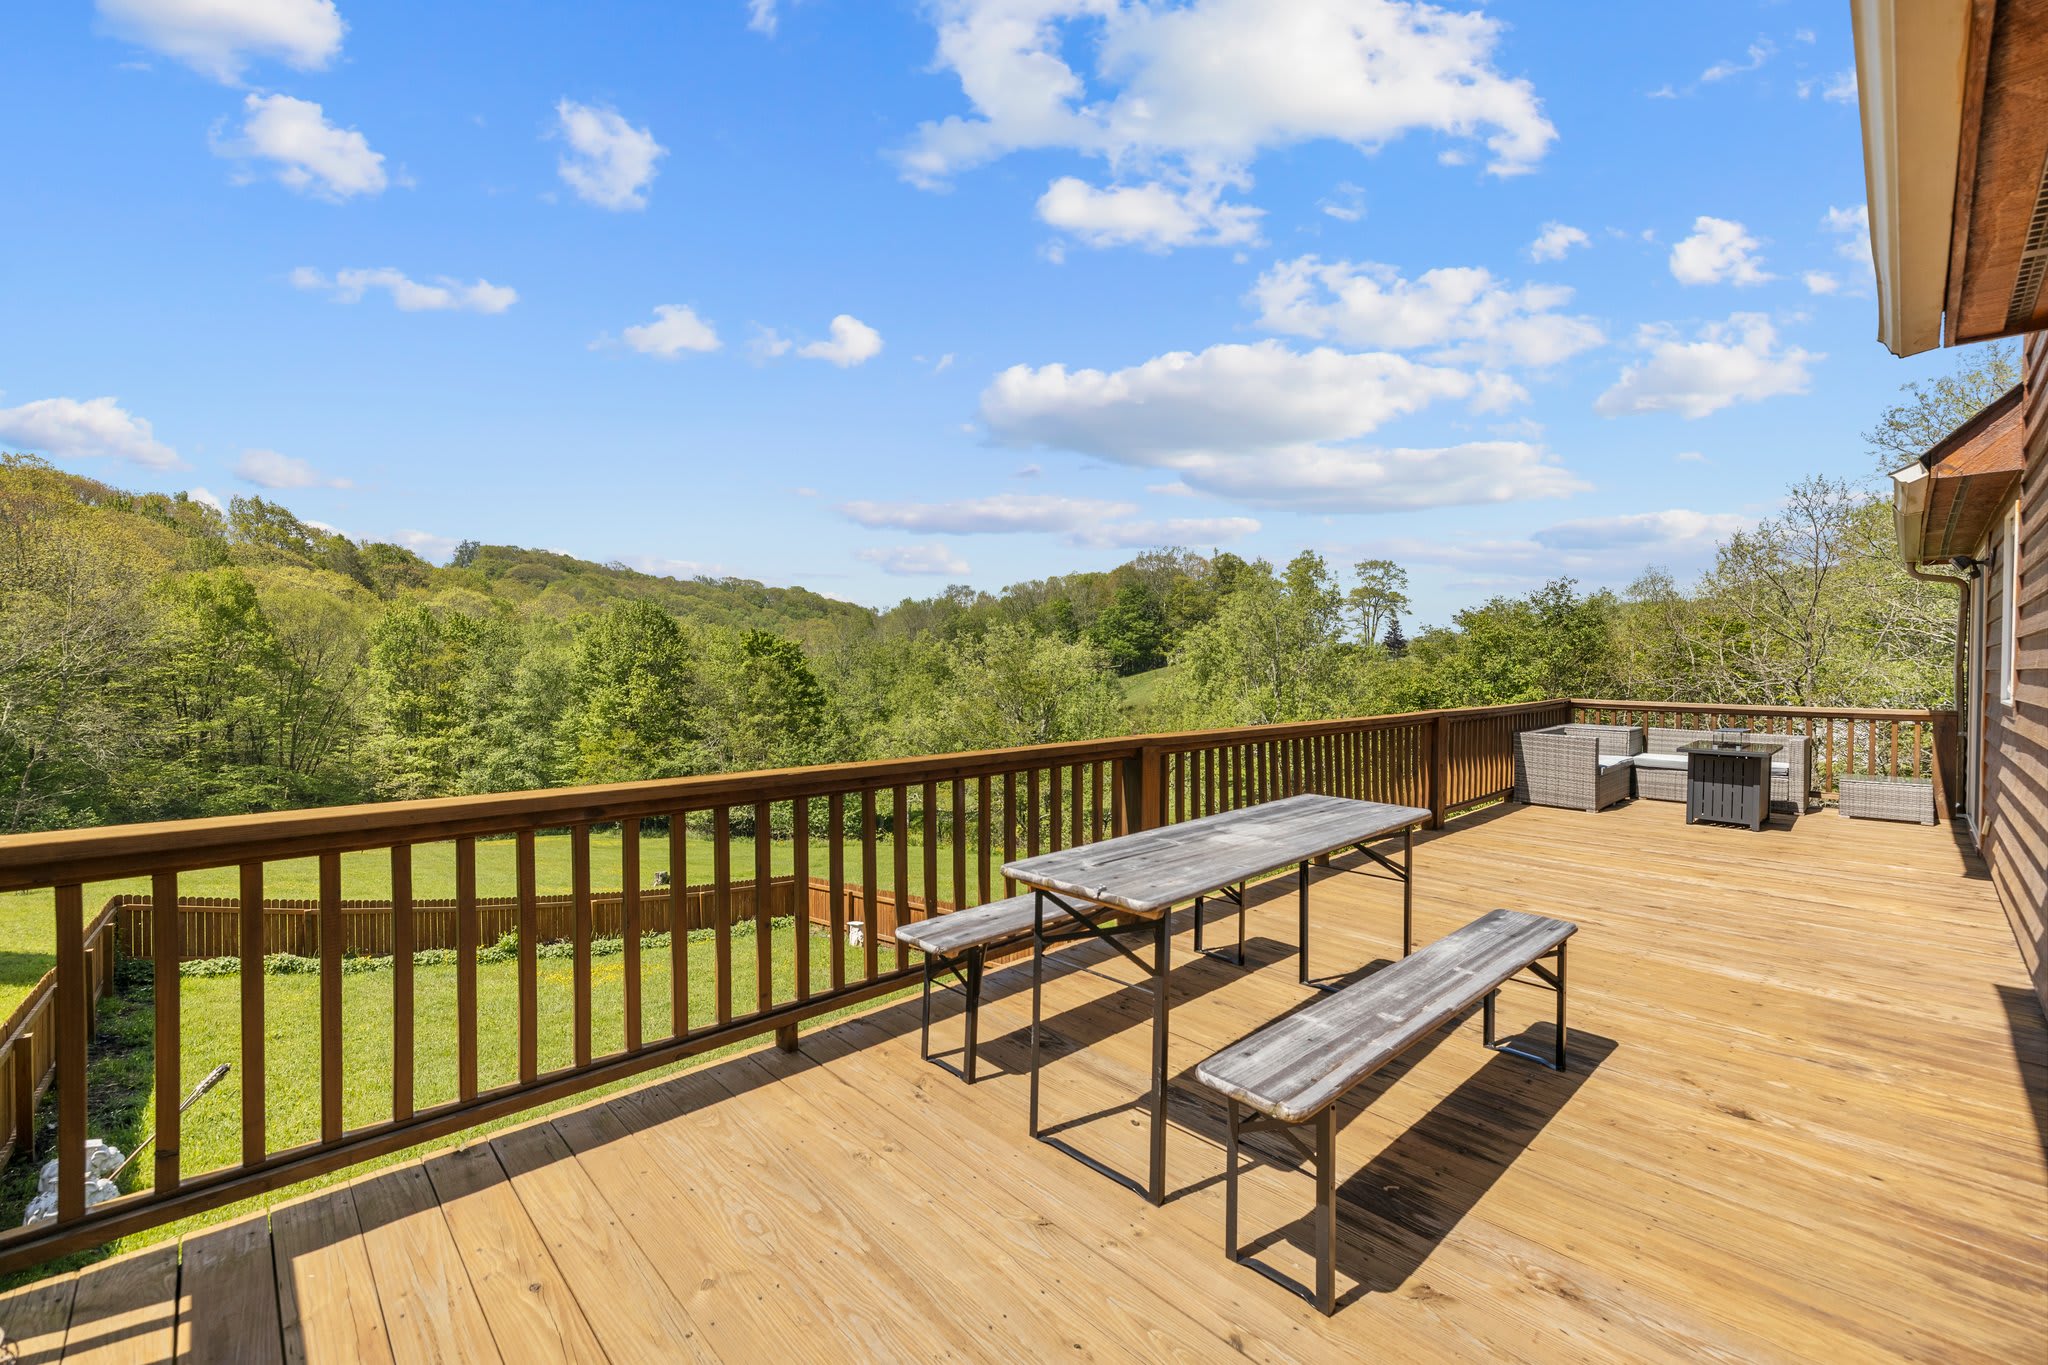 This back deck is the spot to take some deep breaths and disconnect while the dogs enjoy the fenced in backyard.